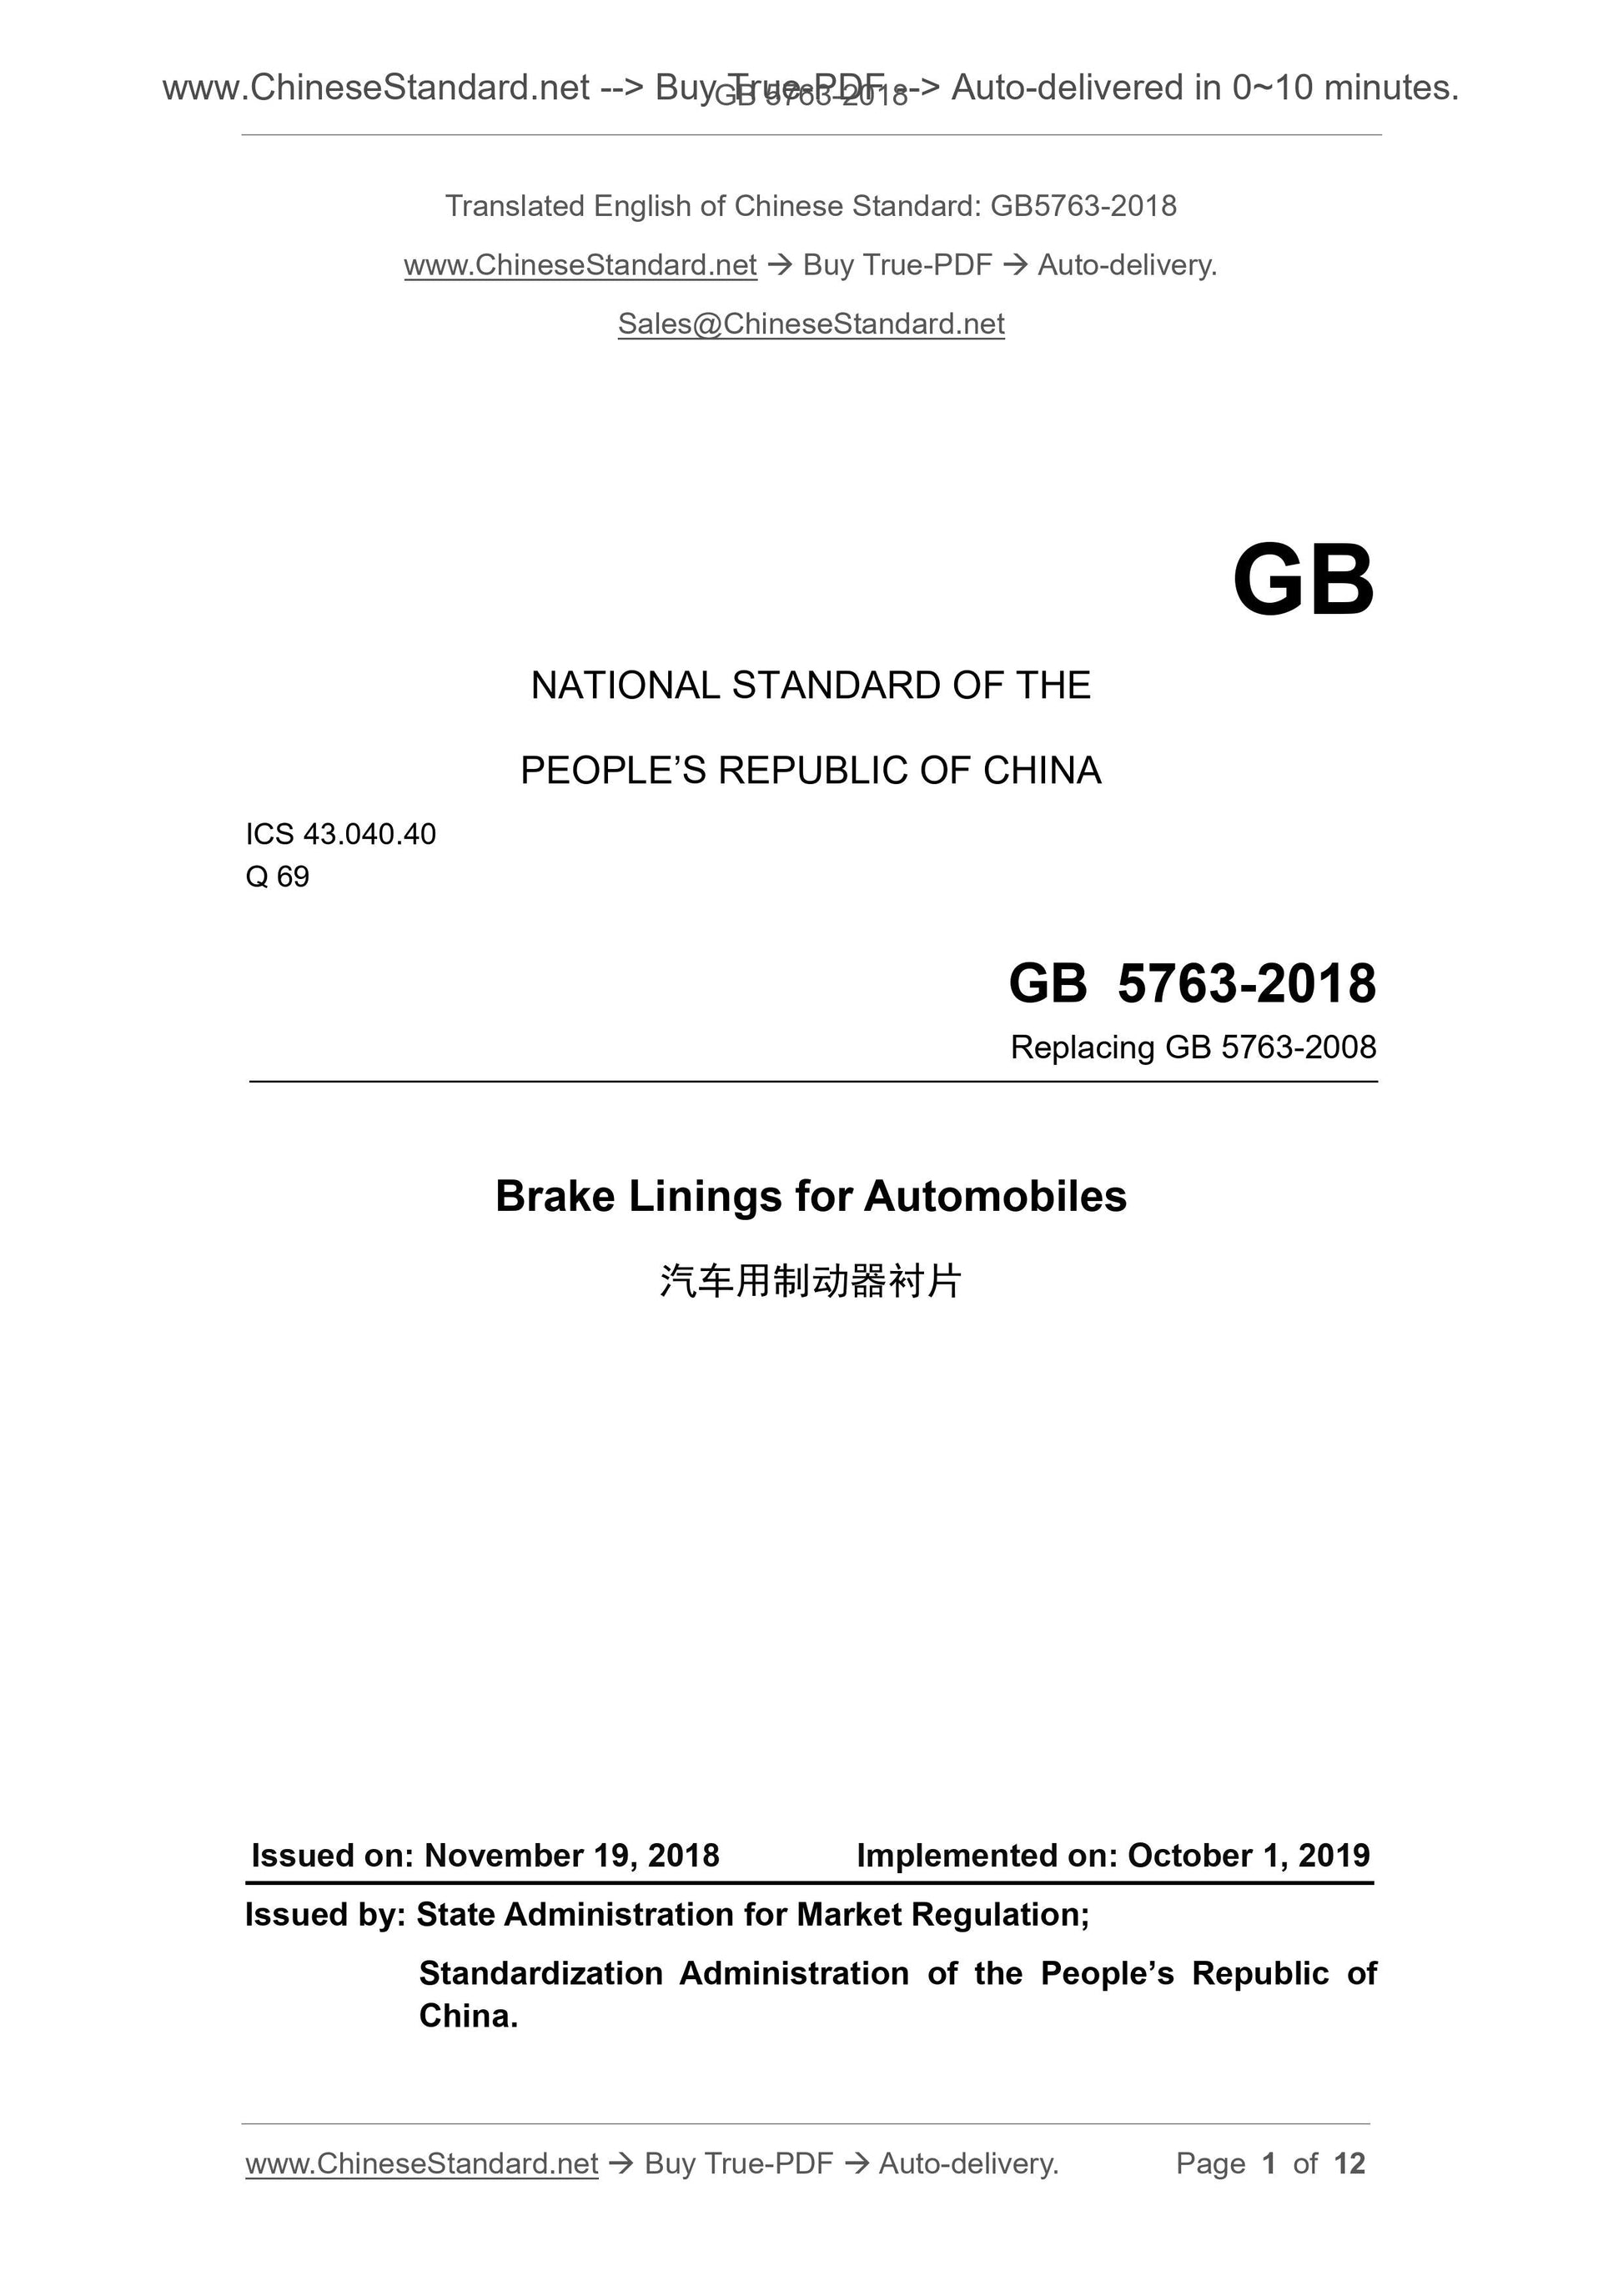 GB 5763-2018 Page 1